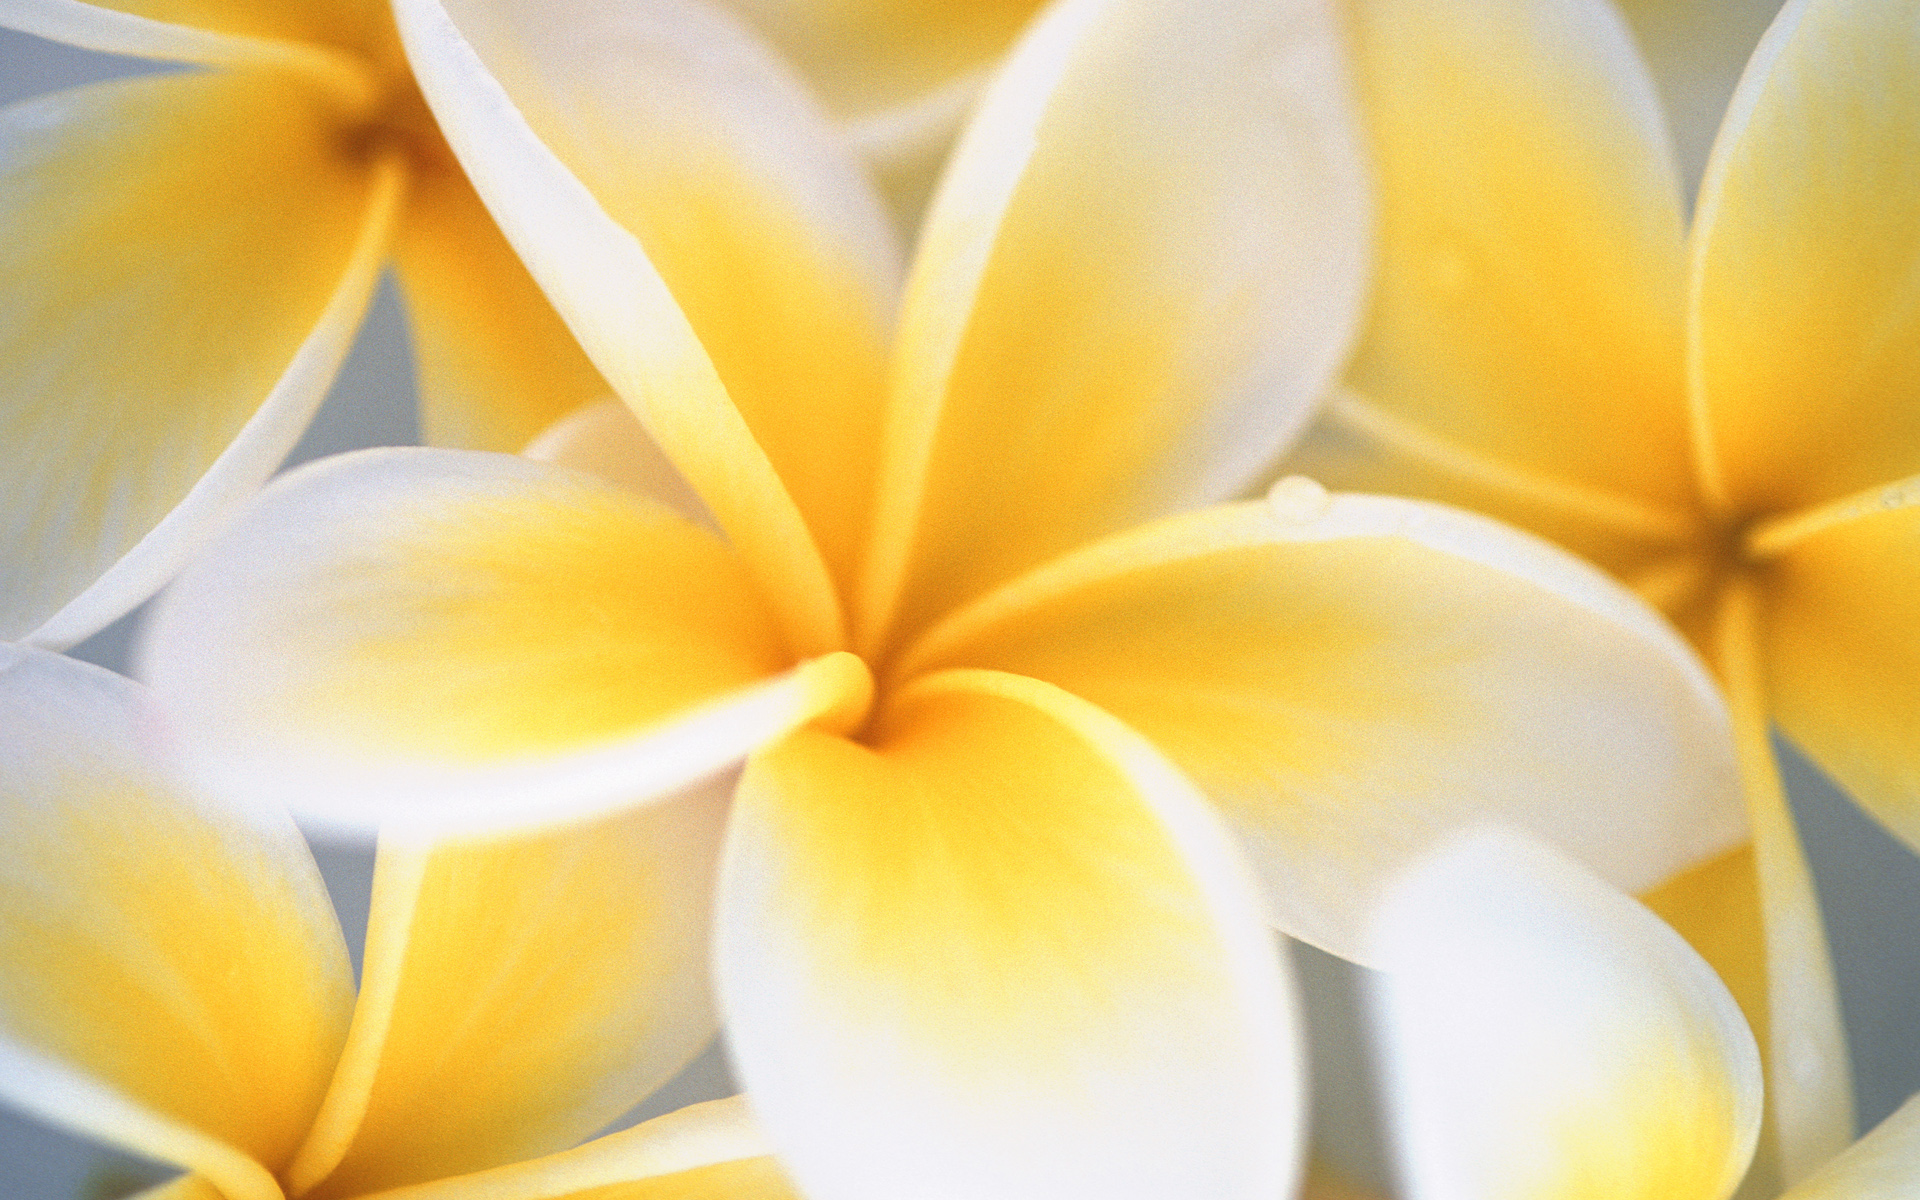 Yellow and White Flowers wallpaper 1920x1200 23775